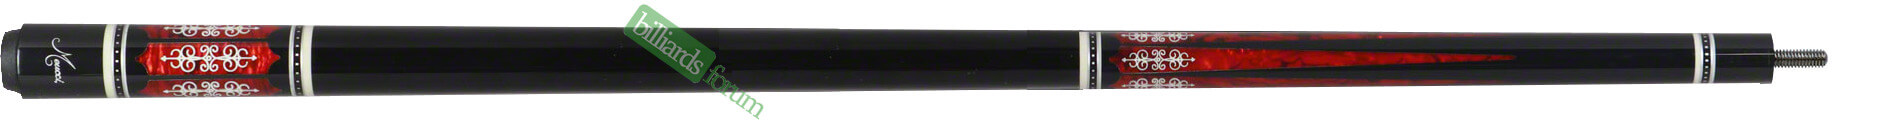 Black Meucci 21st Century Series #3 Cue with Red Paua Shell Inlay, Model 21-3-C-R